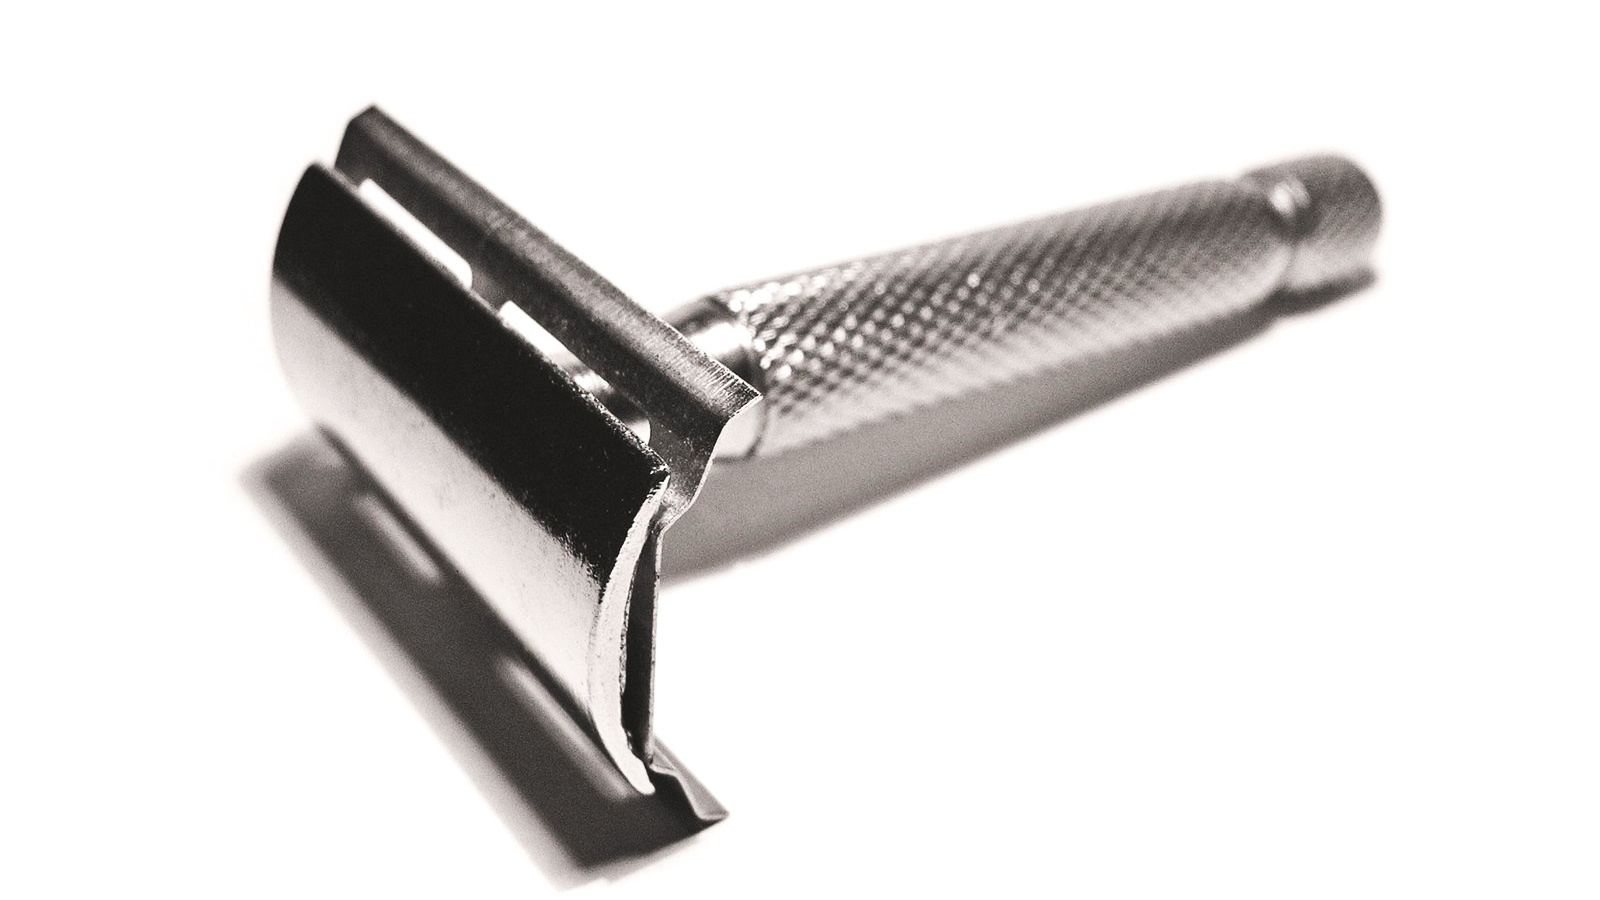 Shave with a safety razor